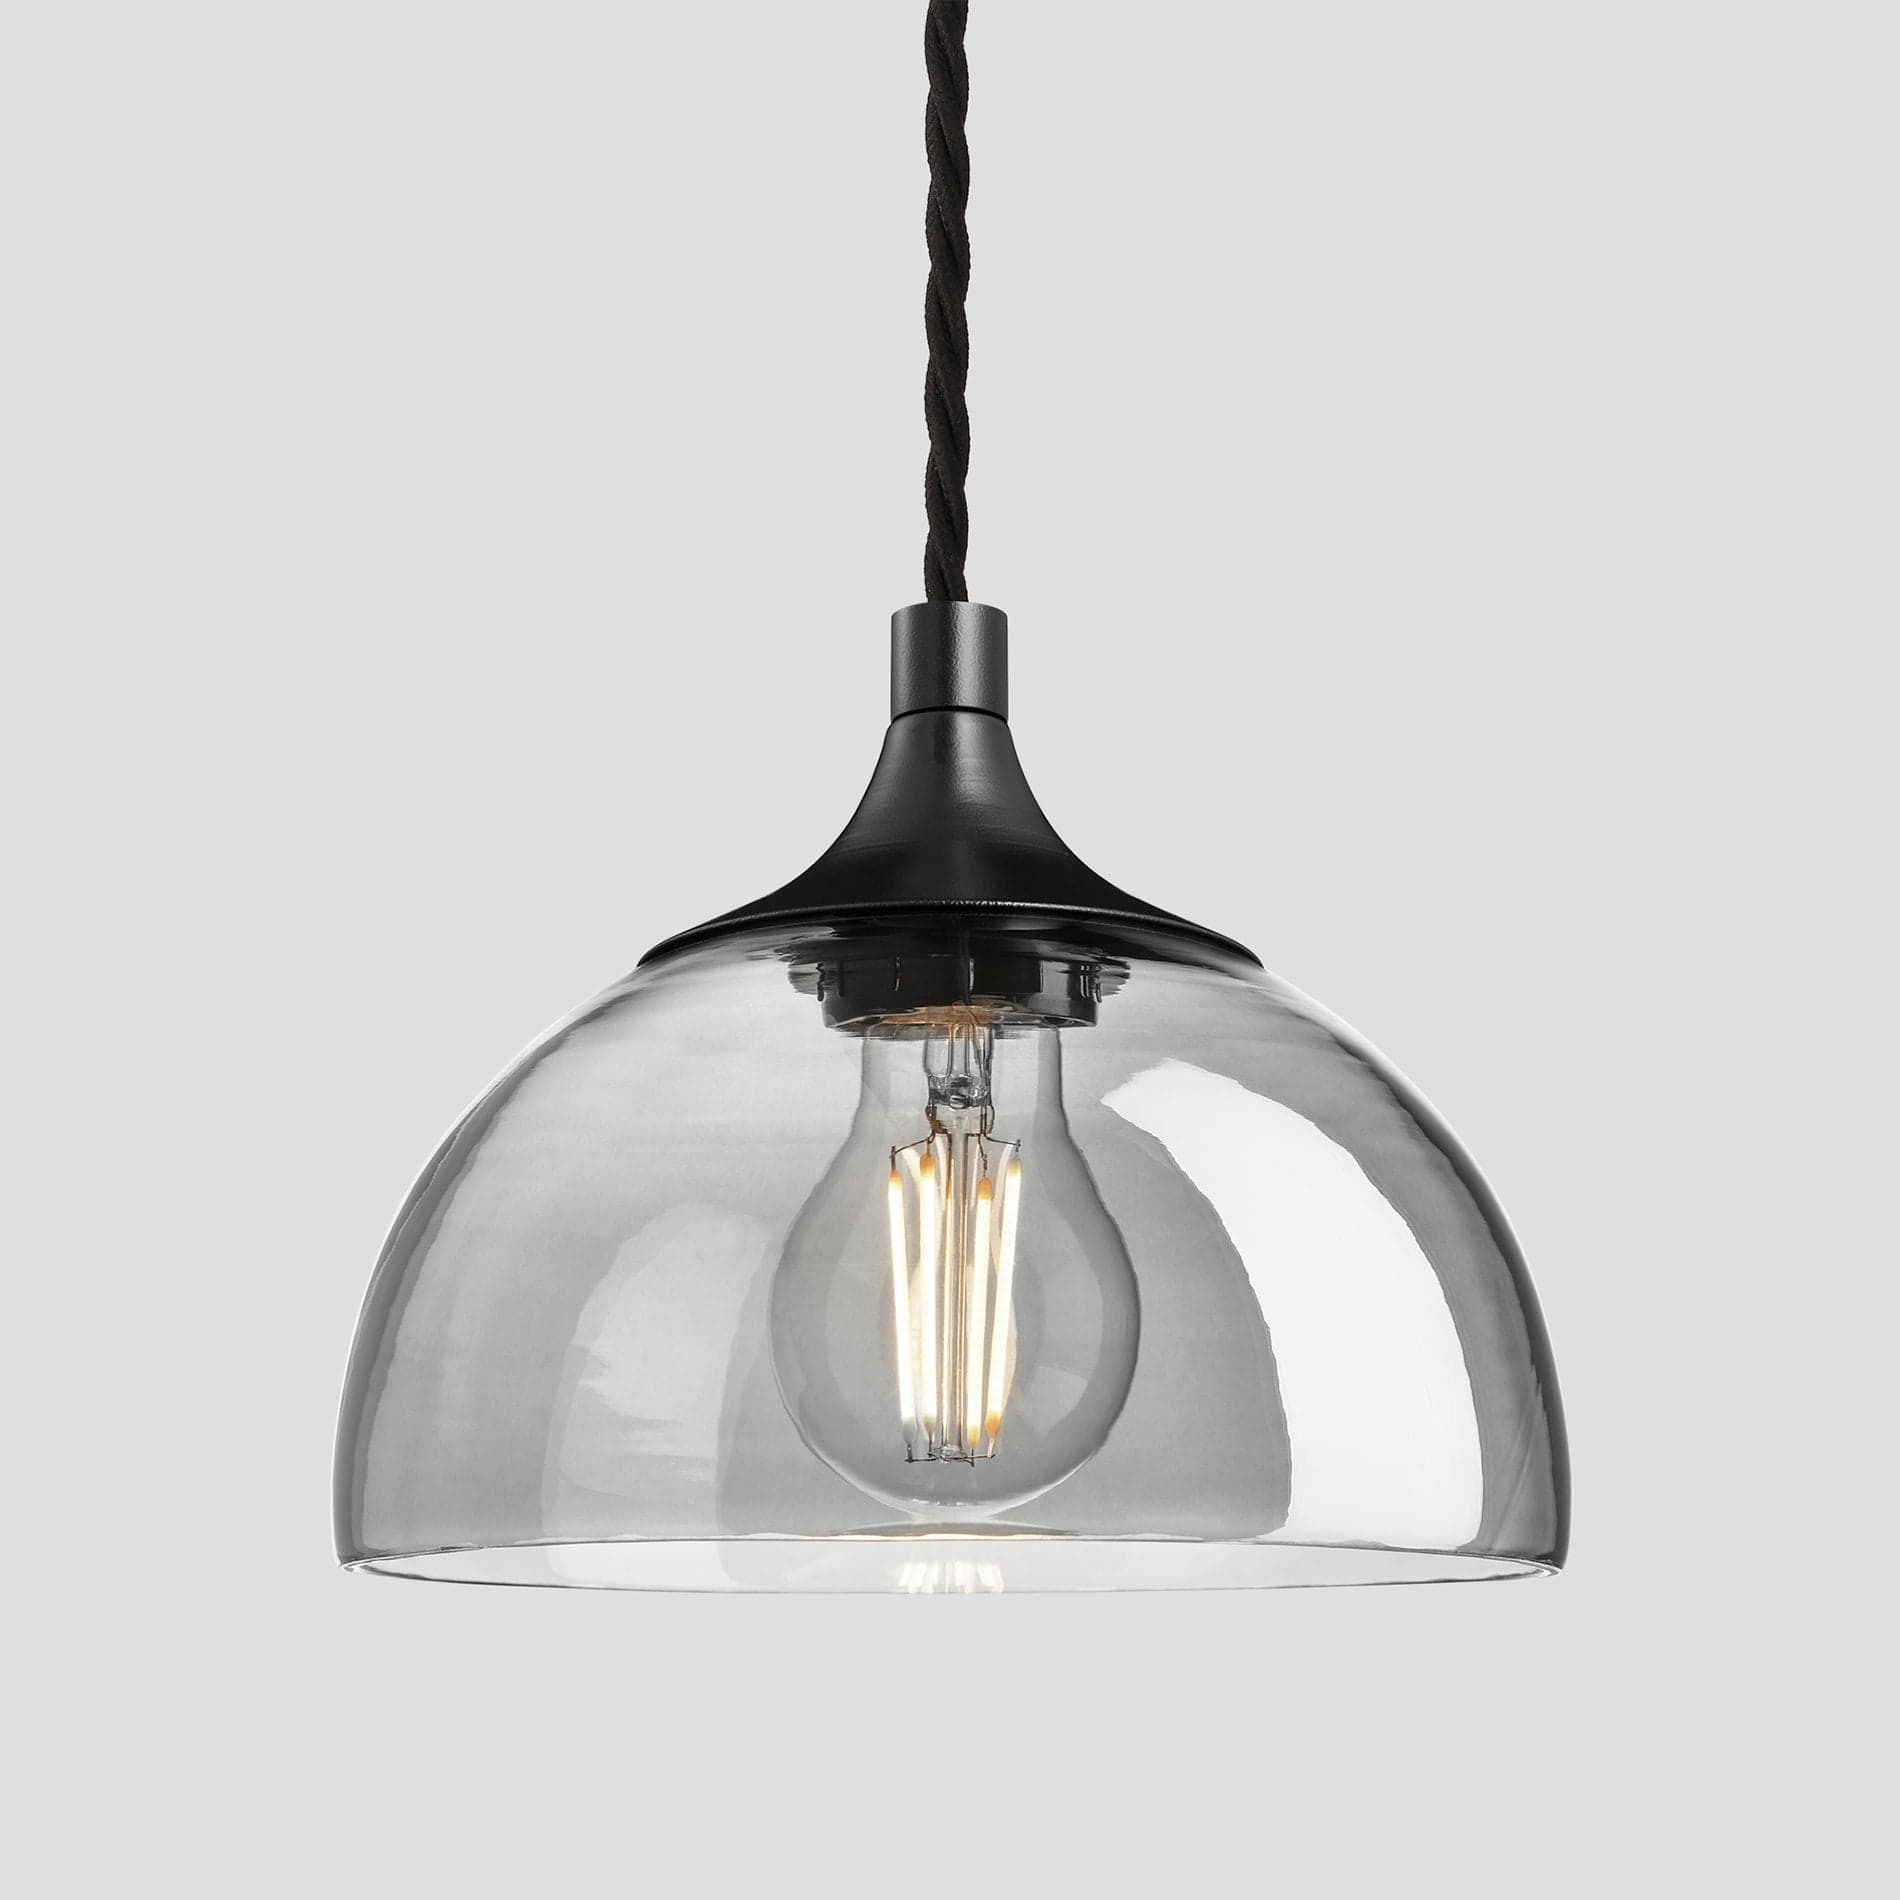 Industville - Chelsea Tinted Glass Dome Pendant Light - 8 Inch - Smoke Grey - image 1